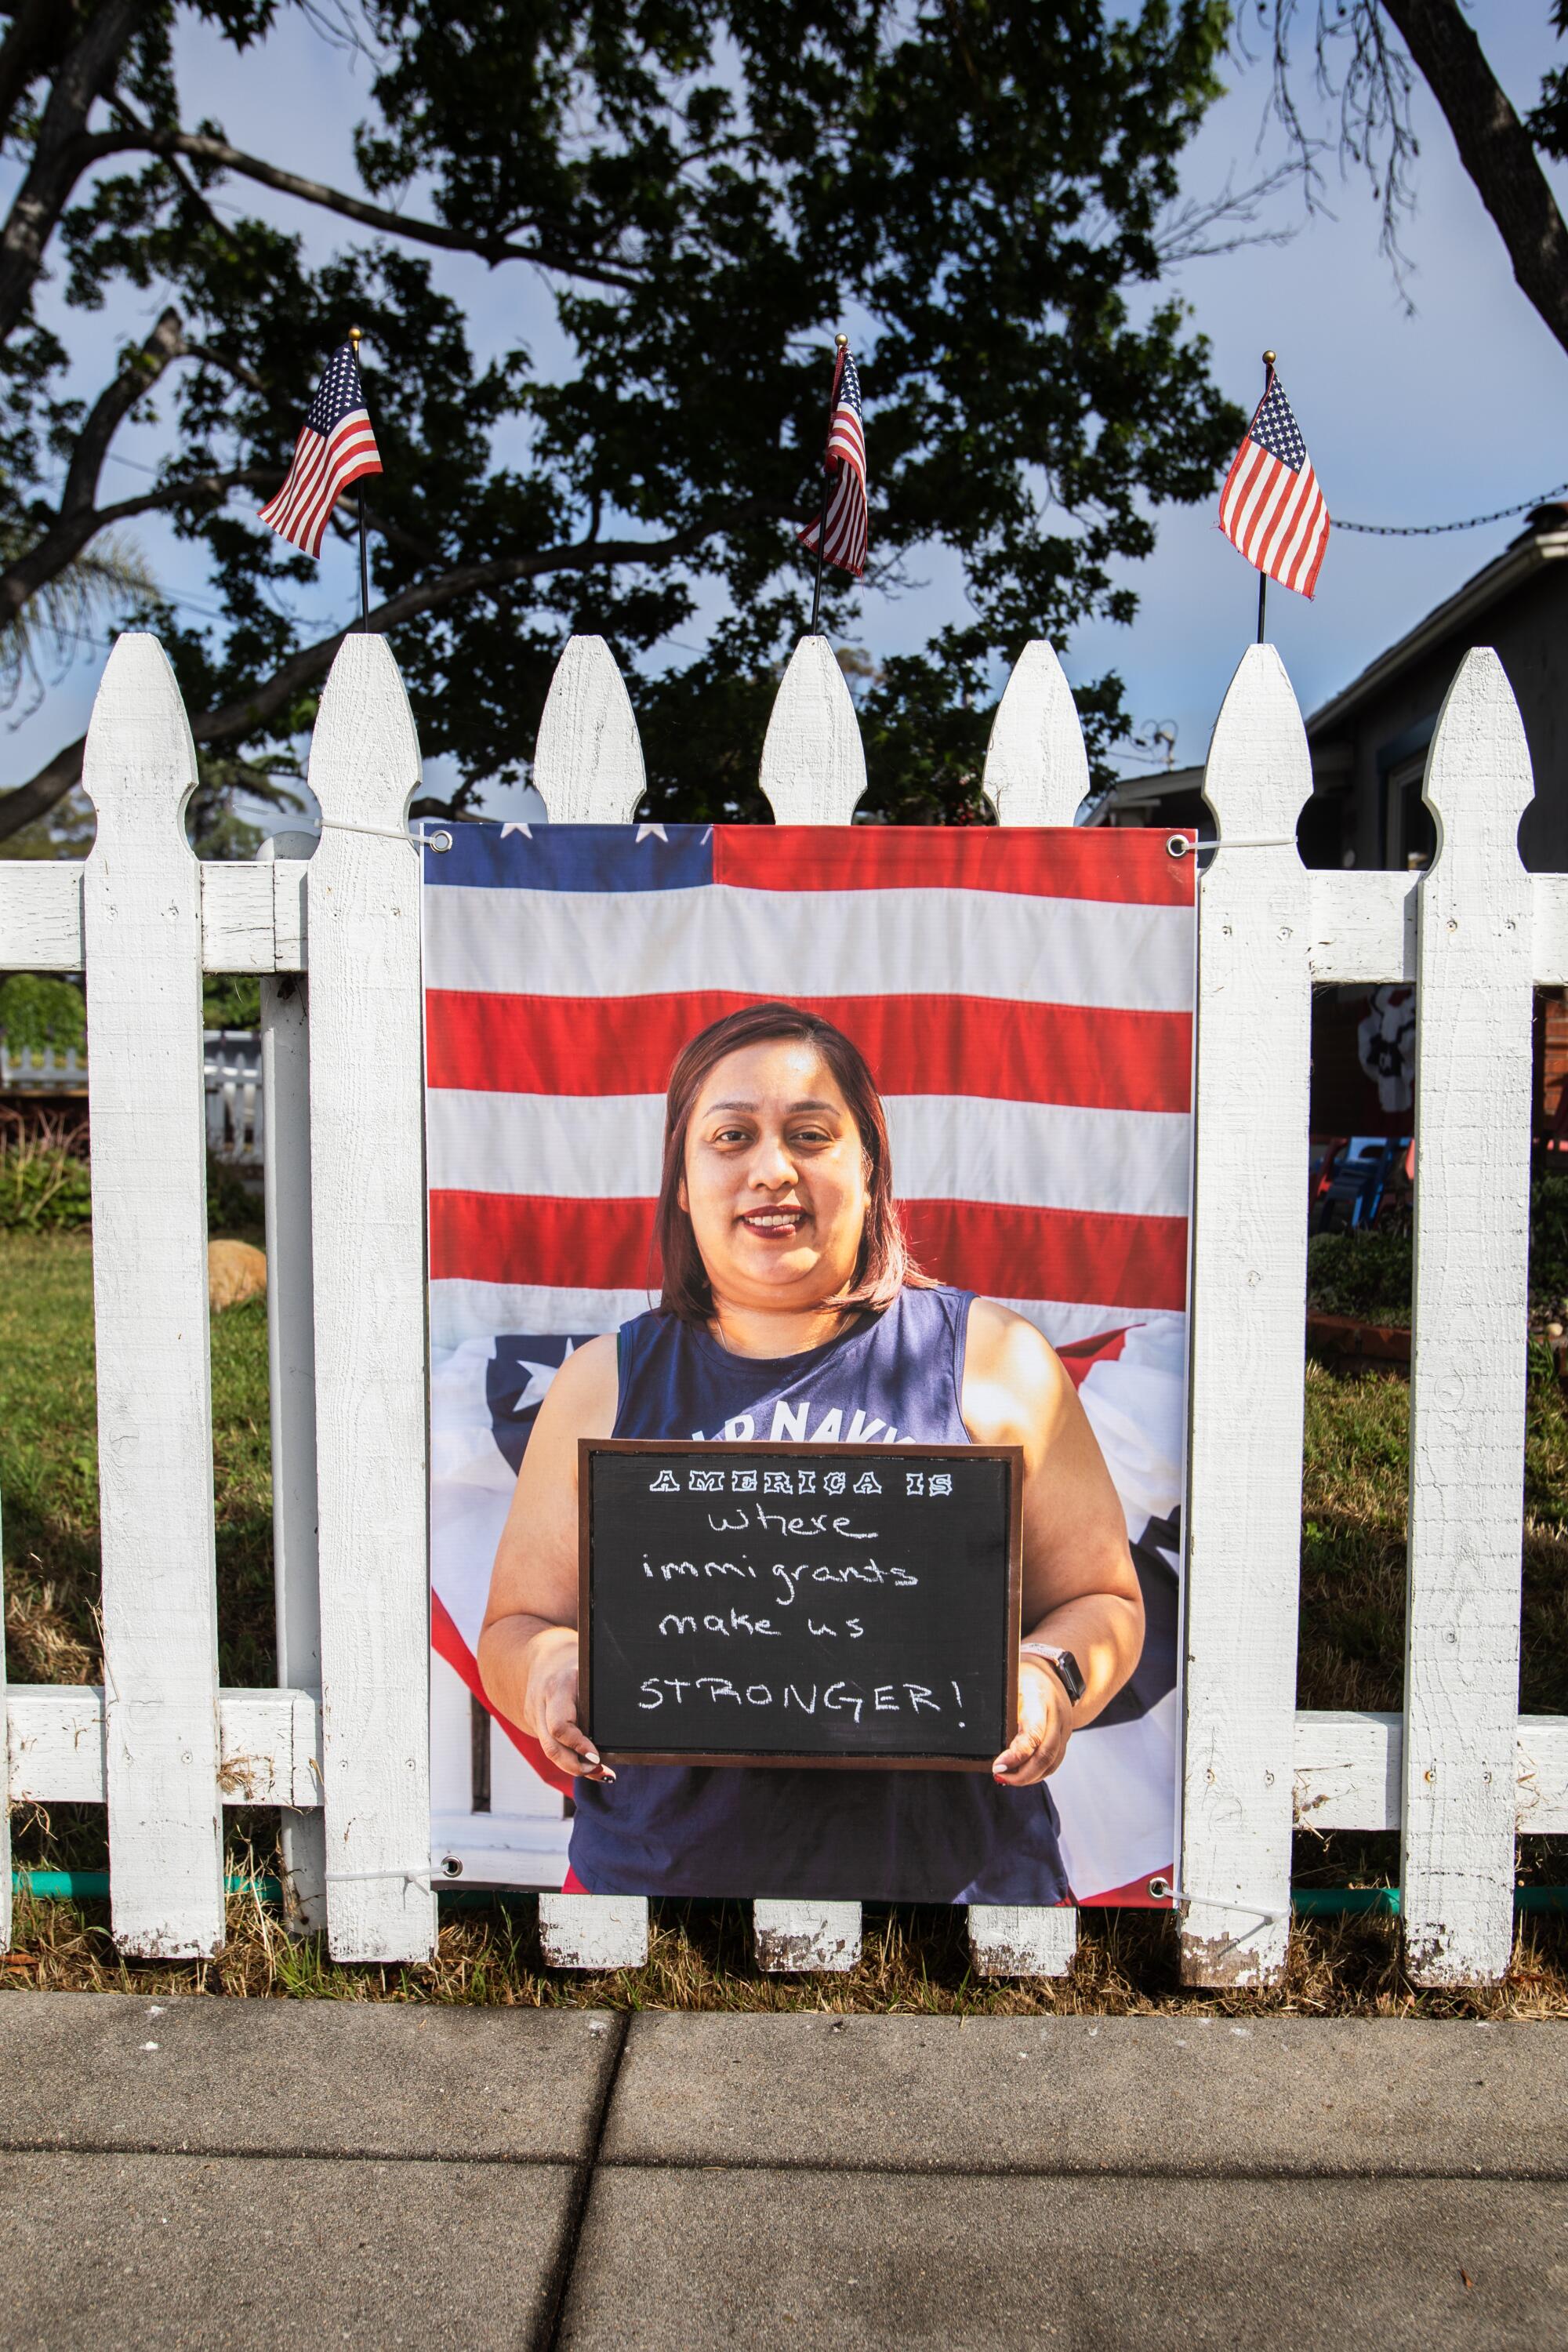  A portrait of a woman holding a sign in front of an American flag hangs on a white picket fence 